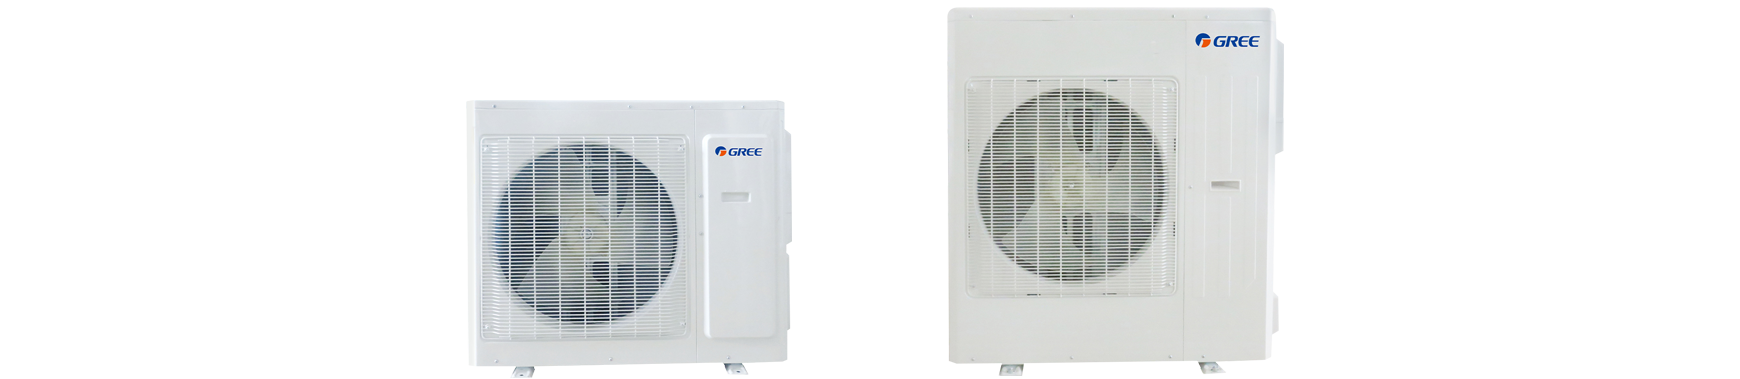 GREE Comfort Multi+ Ultra multi-zone heating and cooling unit